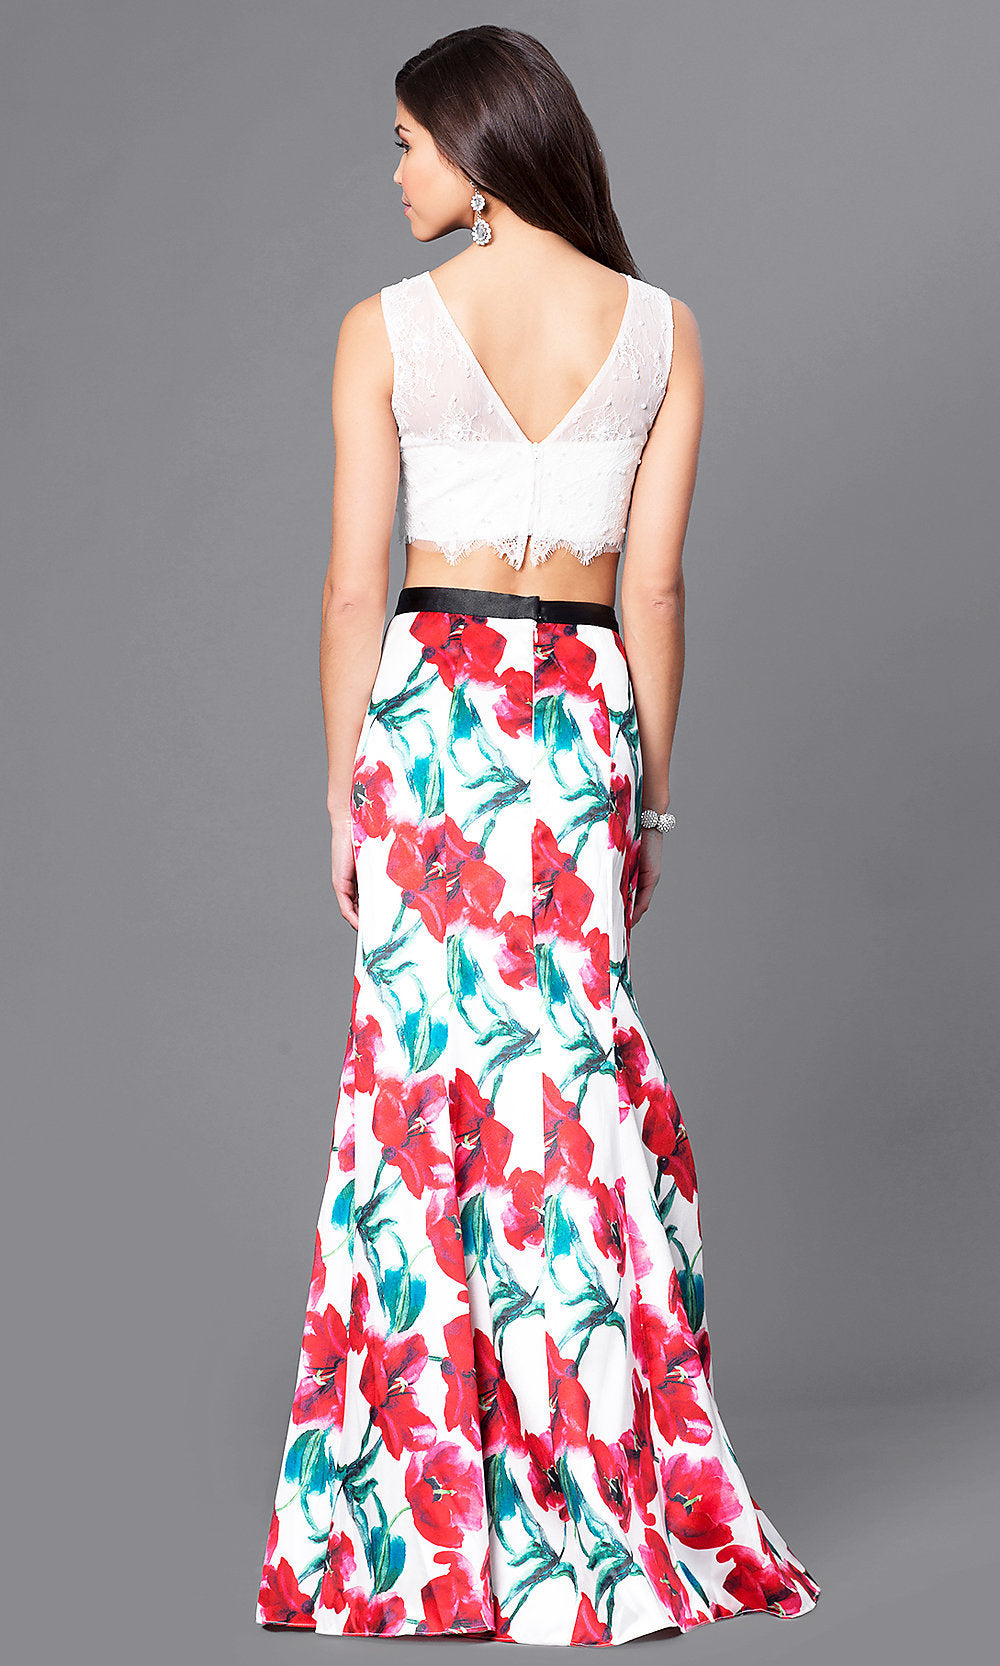 Long Two-Piece Print Skirt and Lace Top Prom Dress